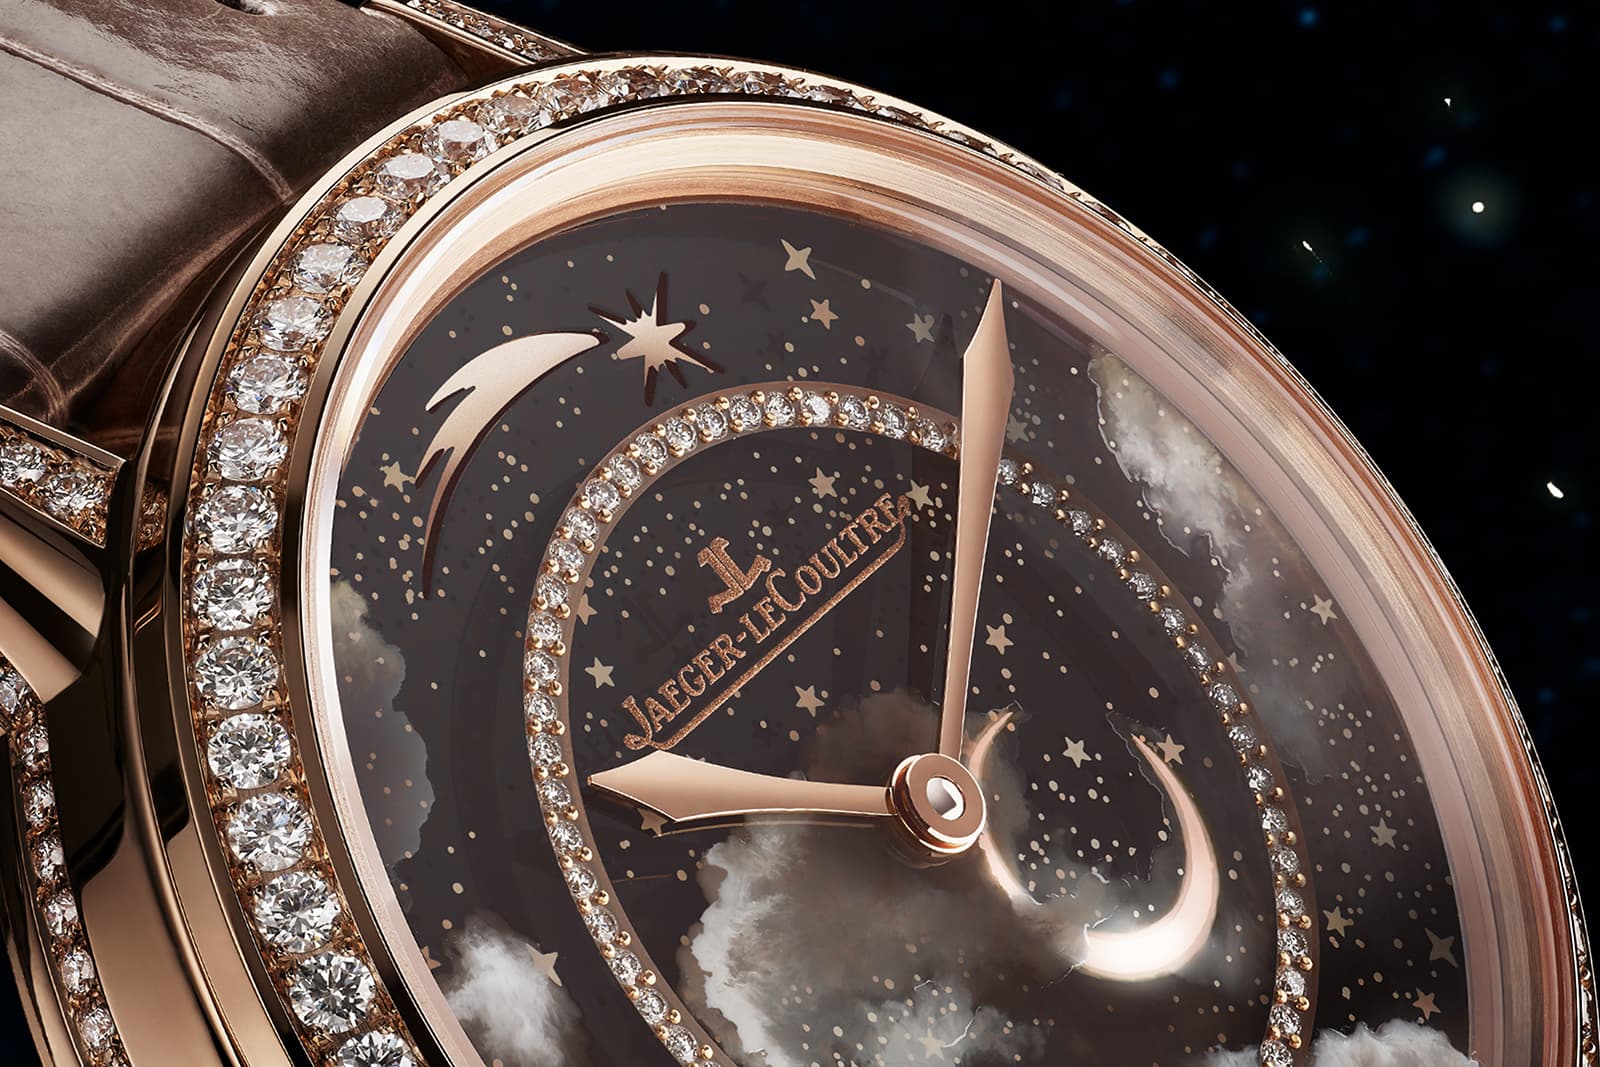 WATCH FACES: Star spotting at Watches and Wonders